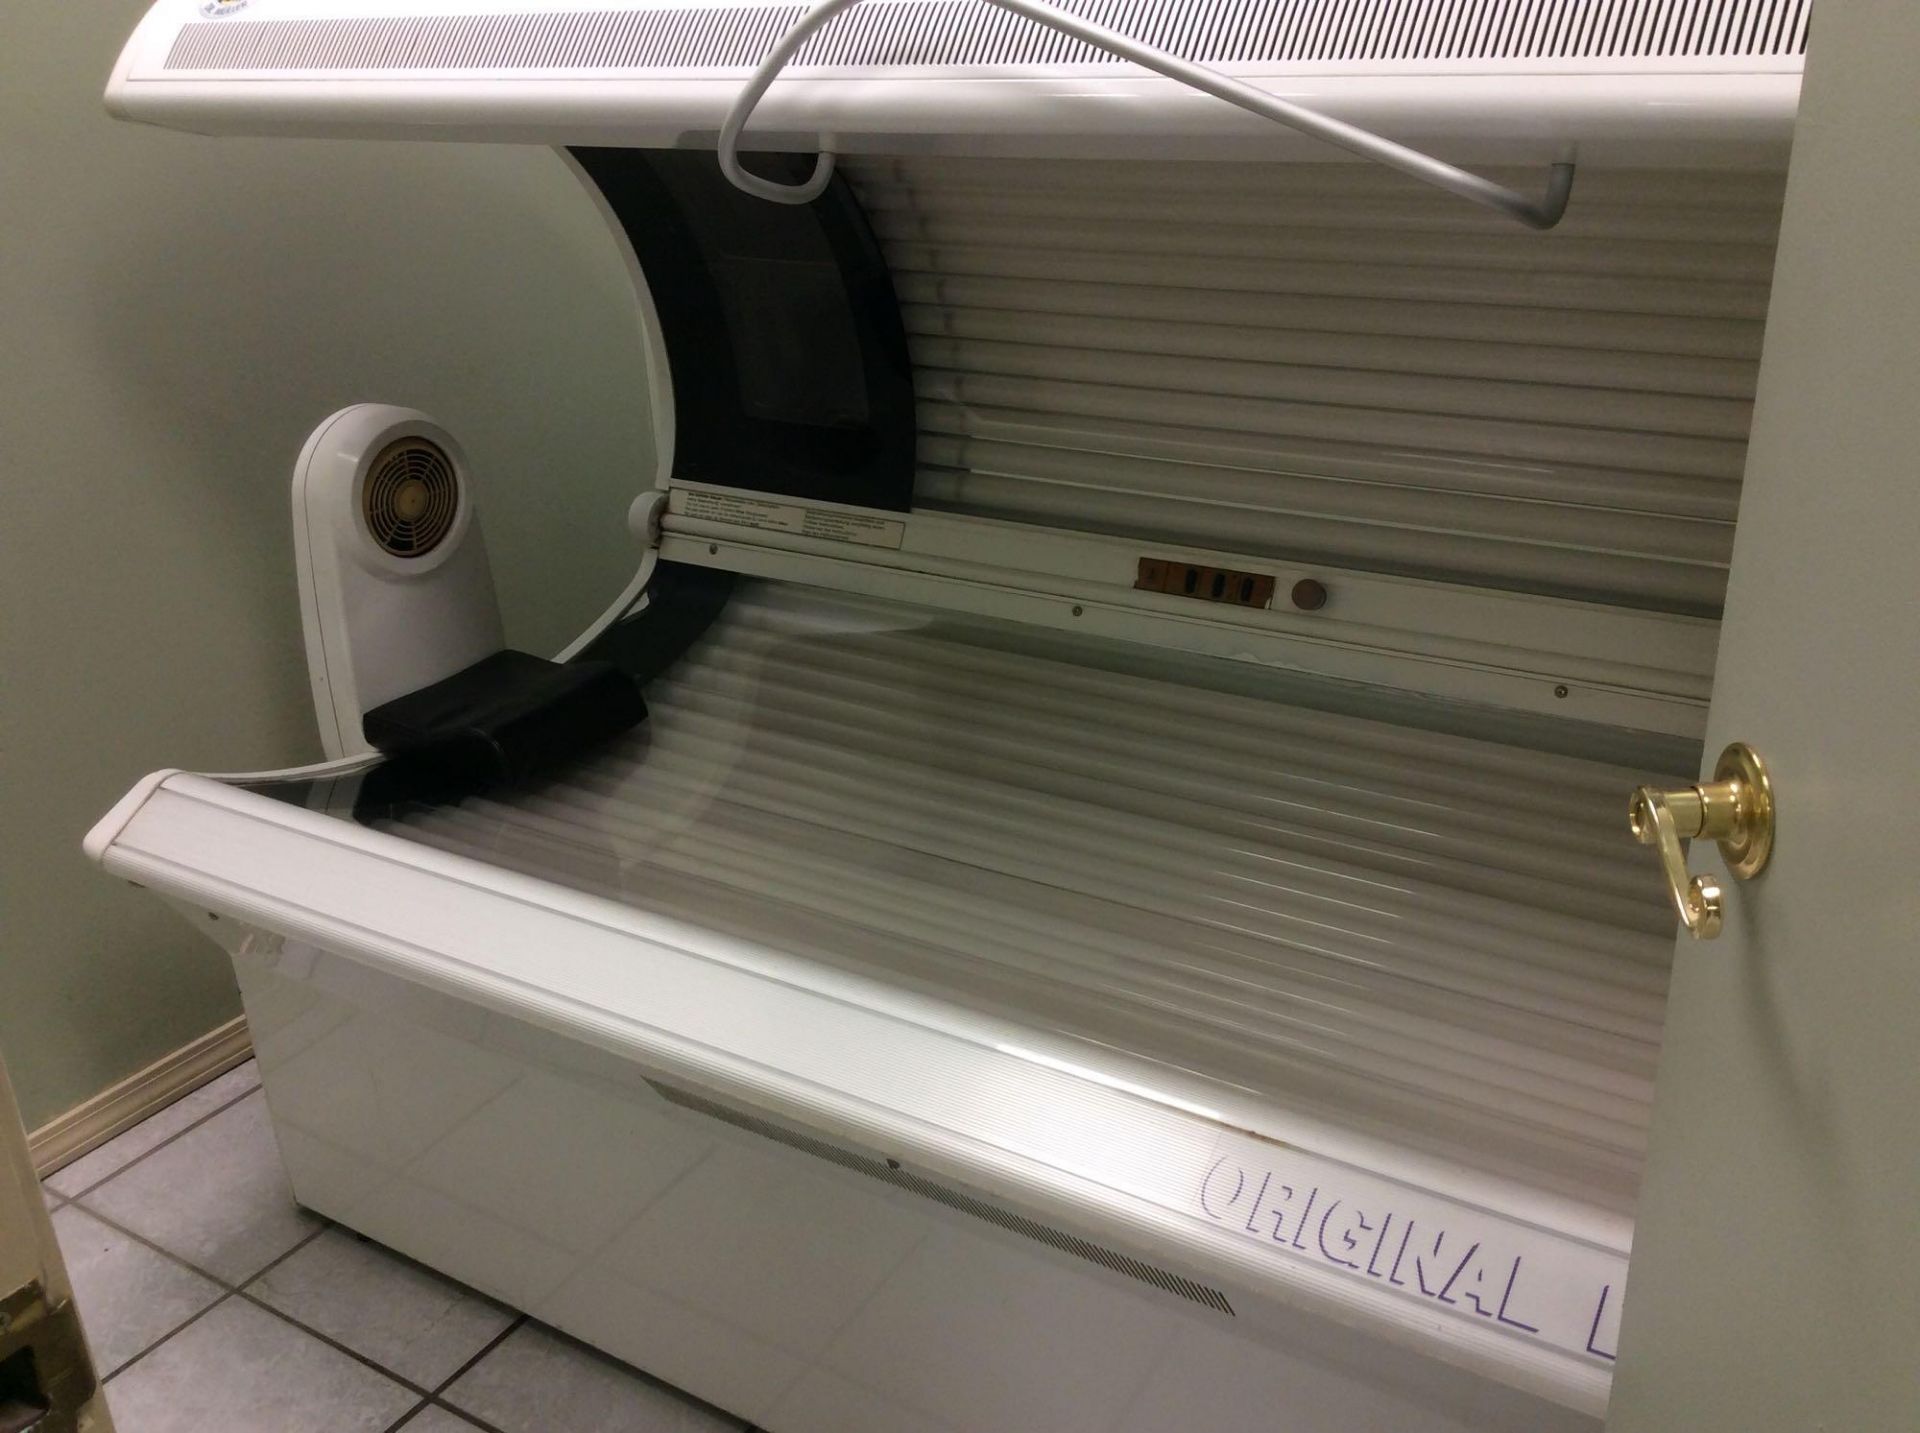 Dr Muller "Orbit" tanning booth, VHP 44/4, 11,000-watt, with digital timer (room 6), with (45) bulbs - Image 2 of 3